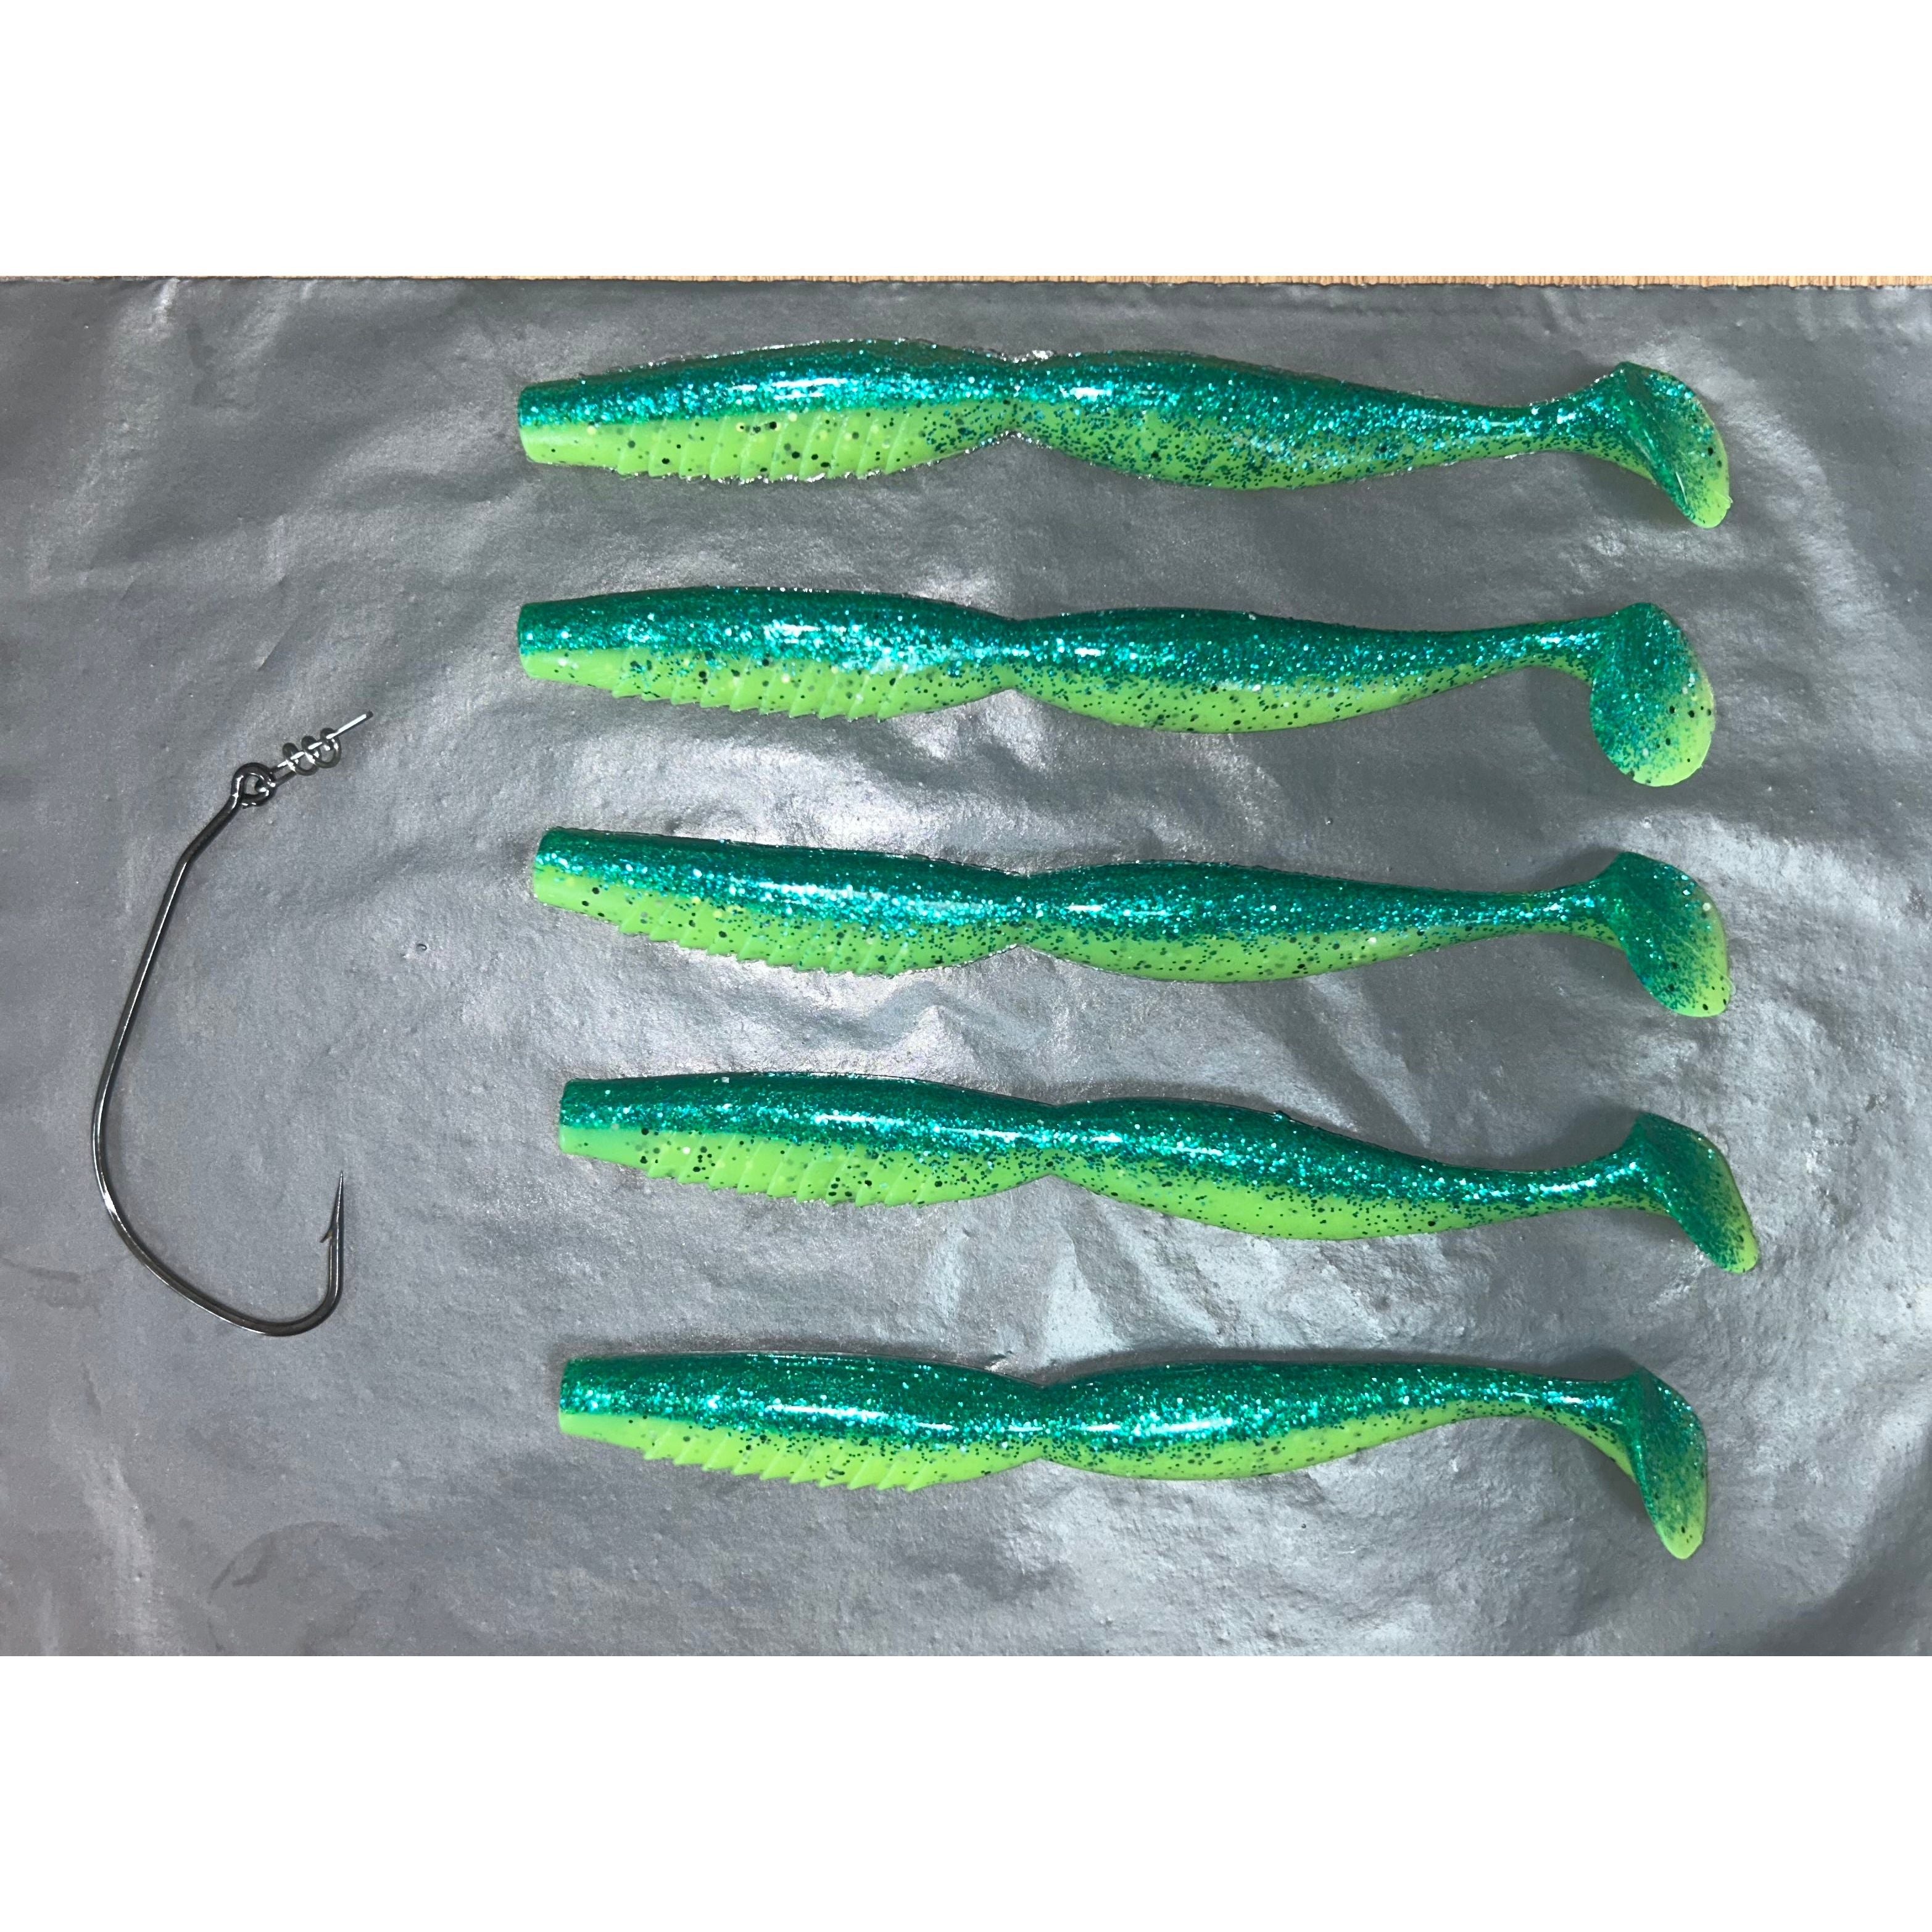 5” Spindle Paddletail Spinner Lure Sets